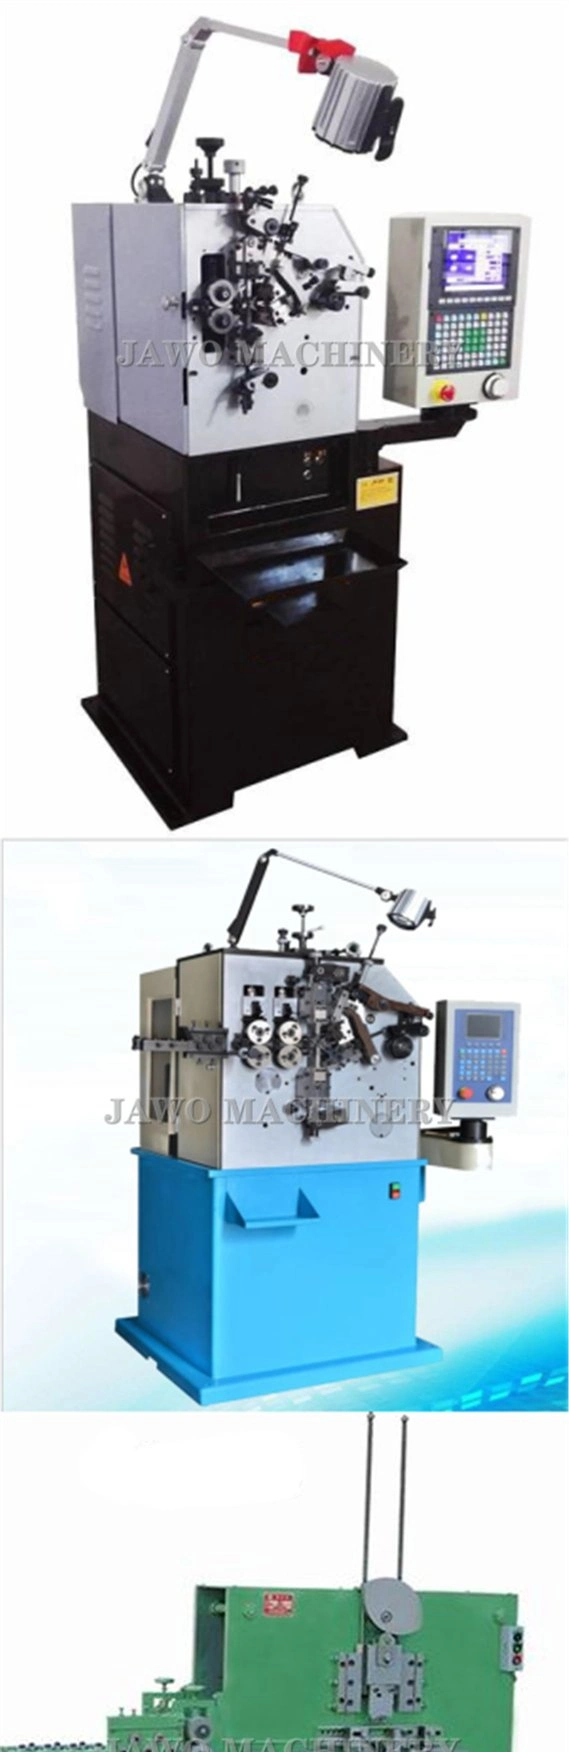 Hot Selling Compression Spring Machine Torsion Spring Machine Made in China